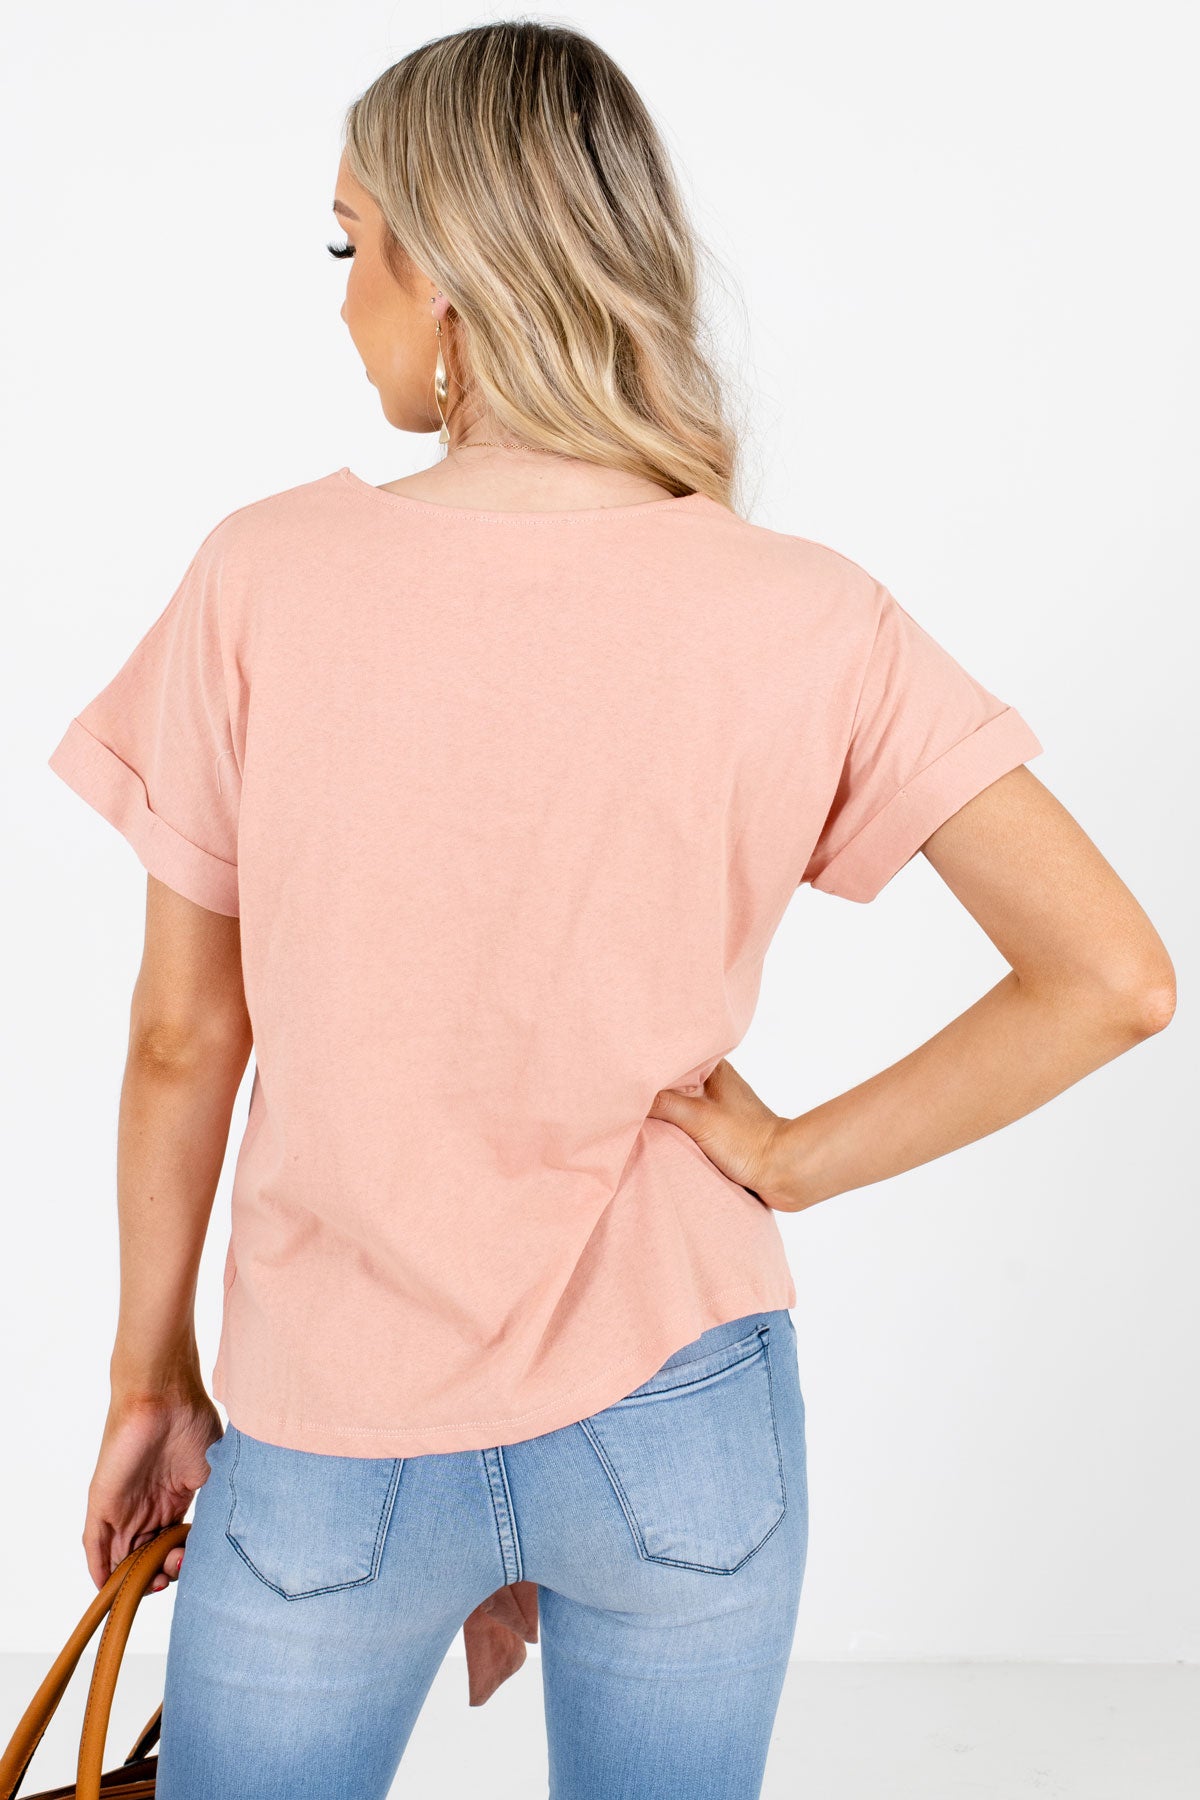 Women's Pink Cuffed Sleeve Boutique Tops